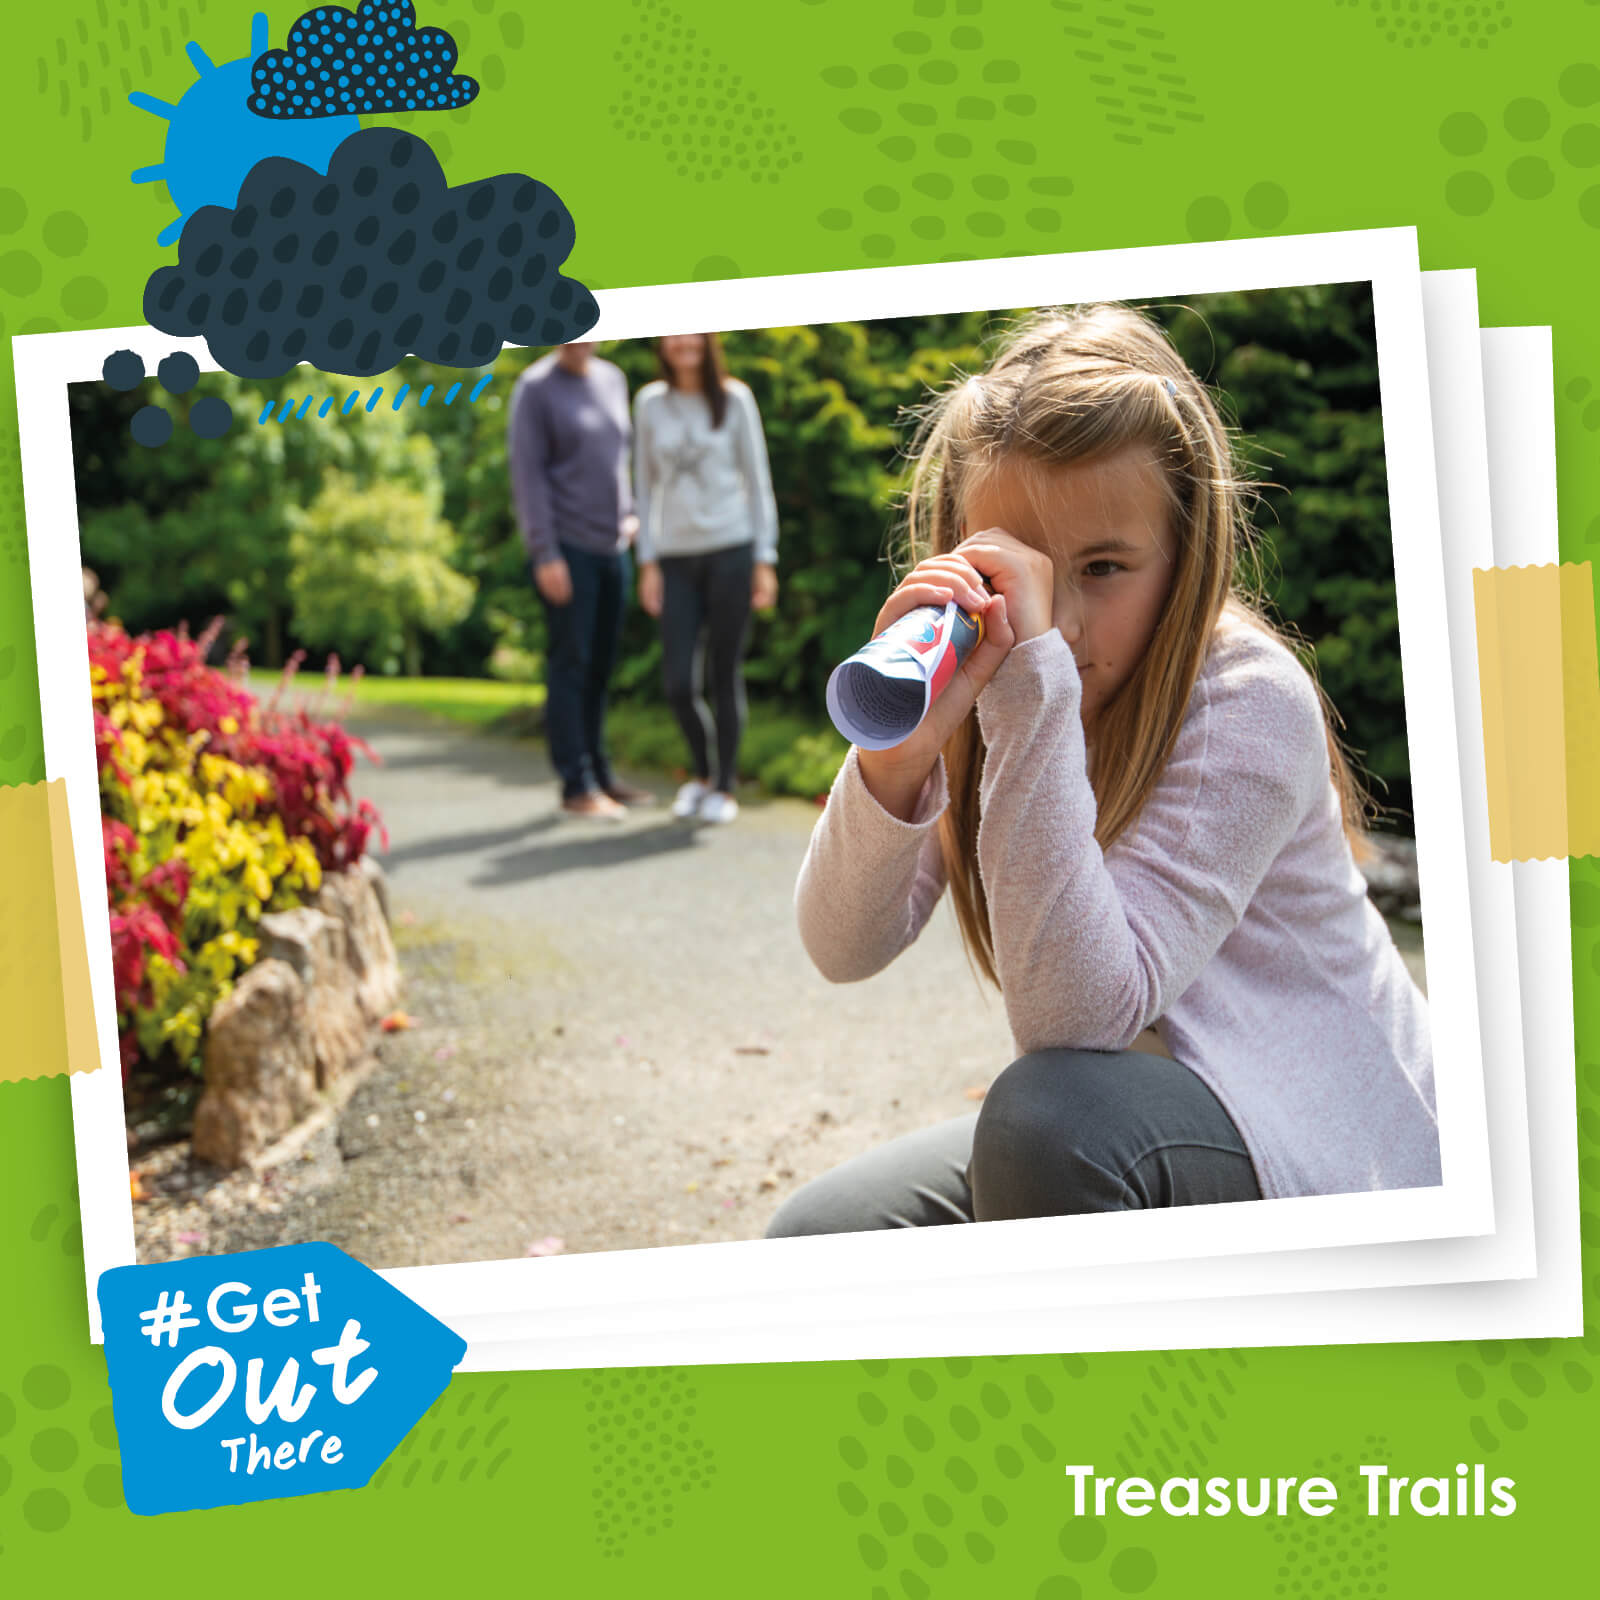 Get Out There with Treasure Trails